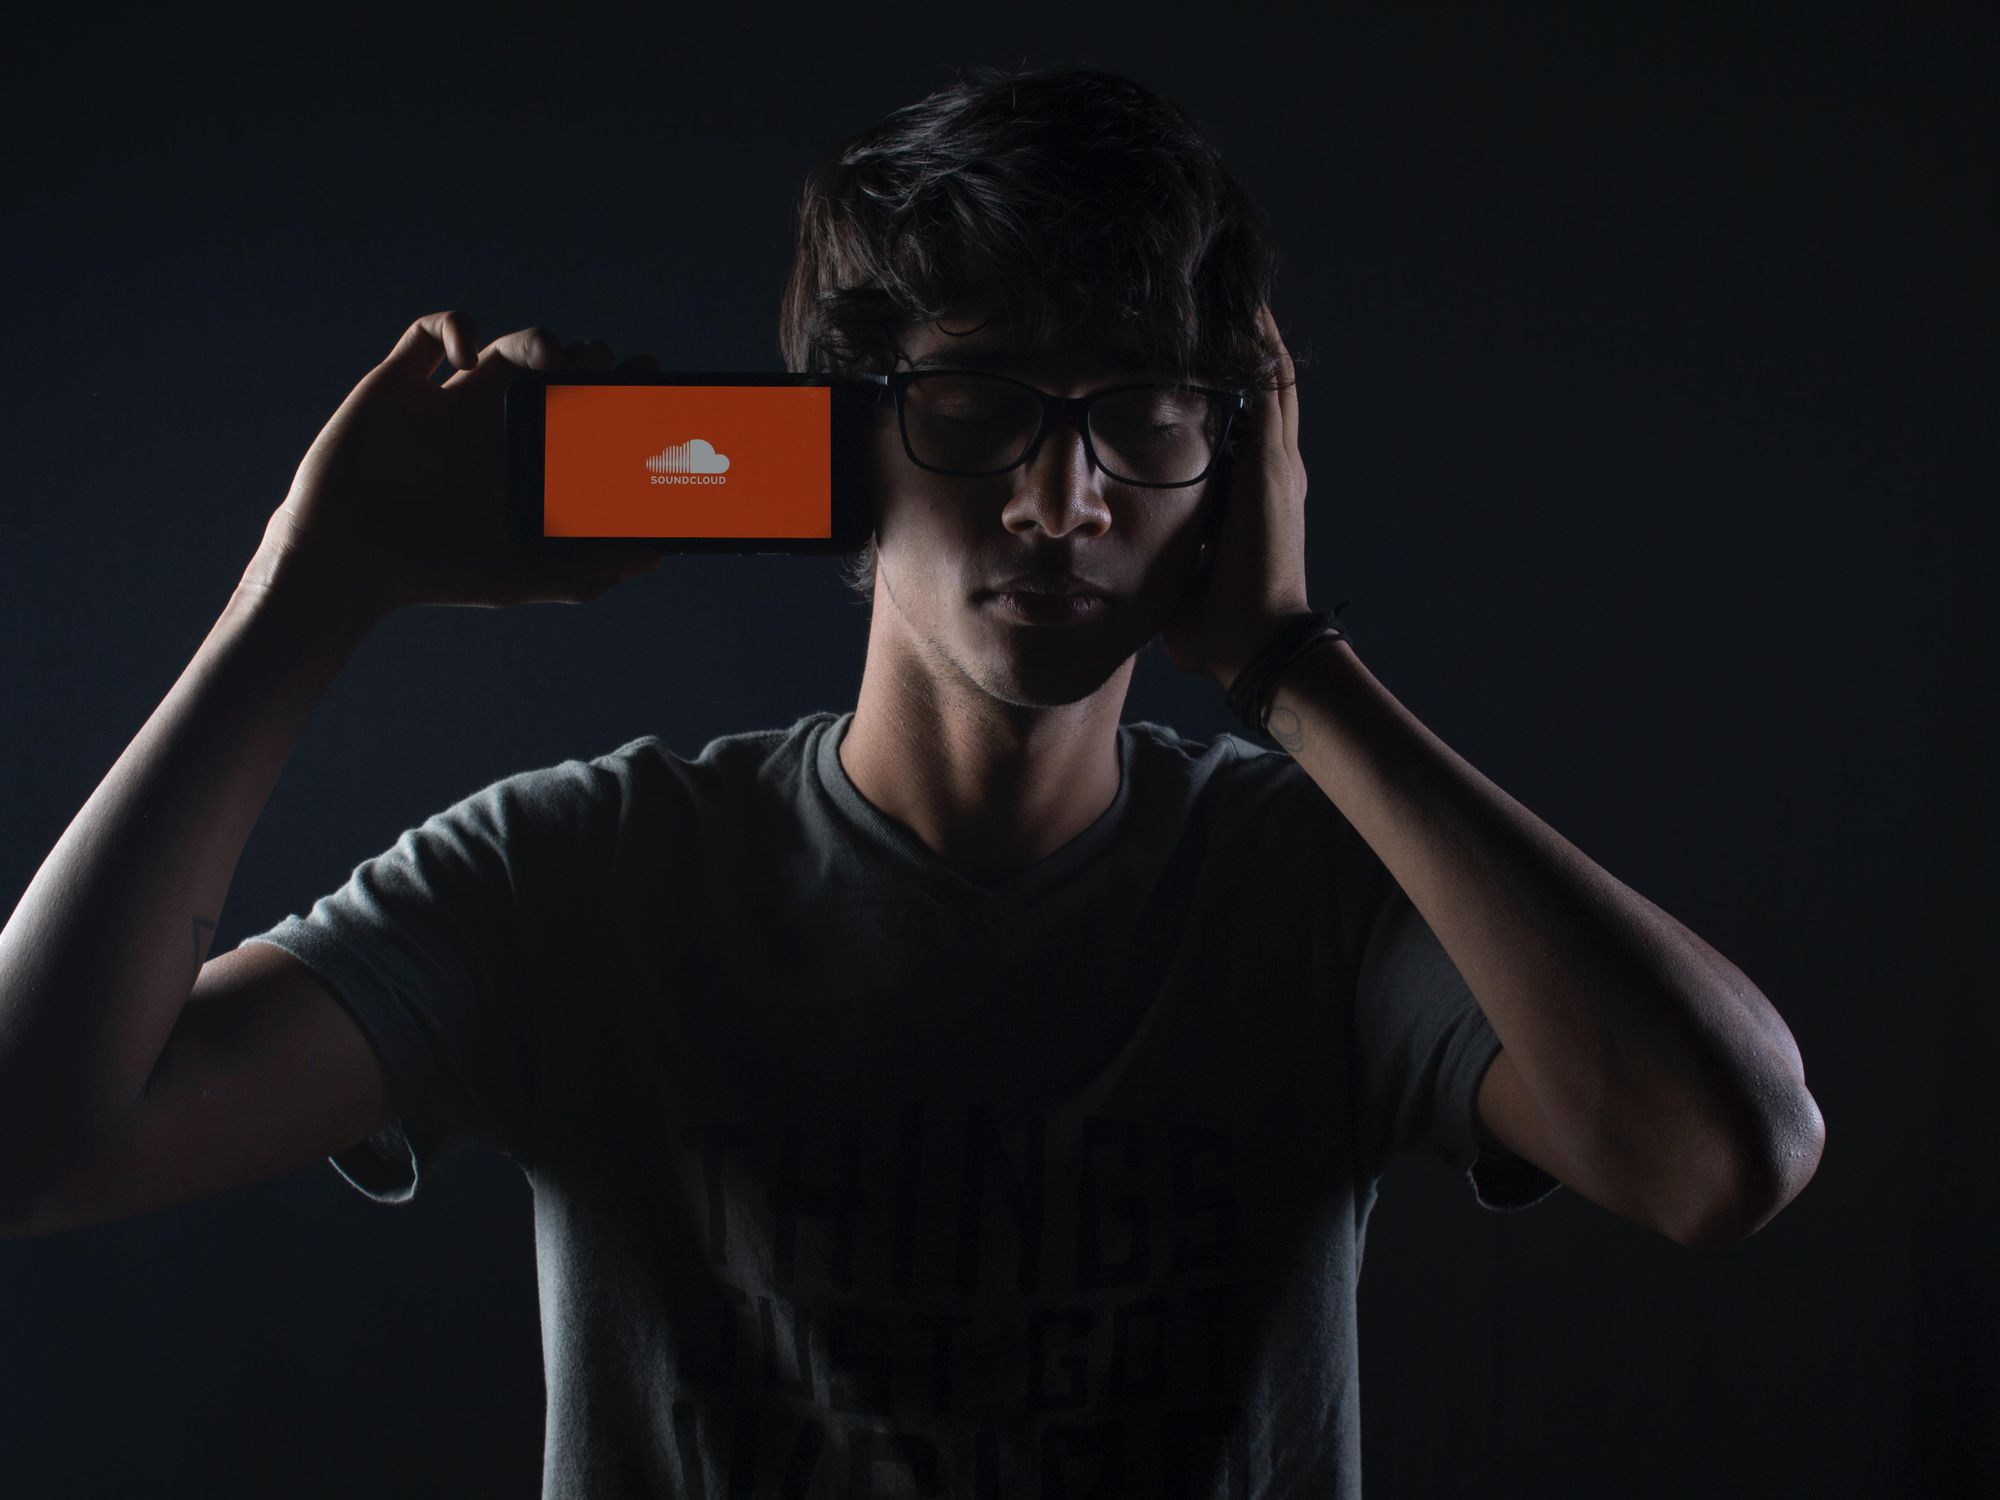 User-Centric or Pro-Rata? SoundCloud Stirs the Debate over How to Equitably Pay Artists